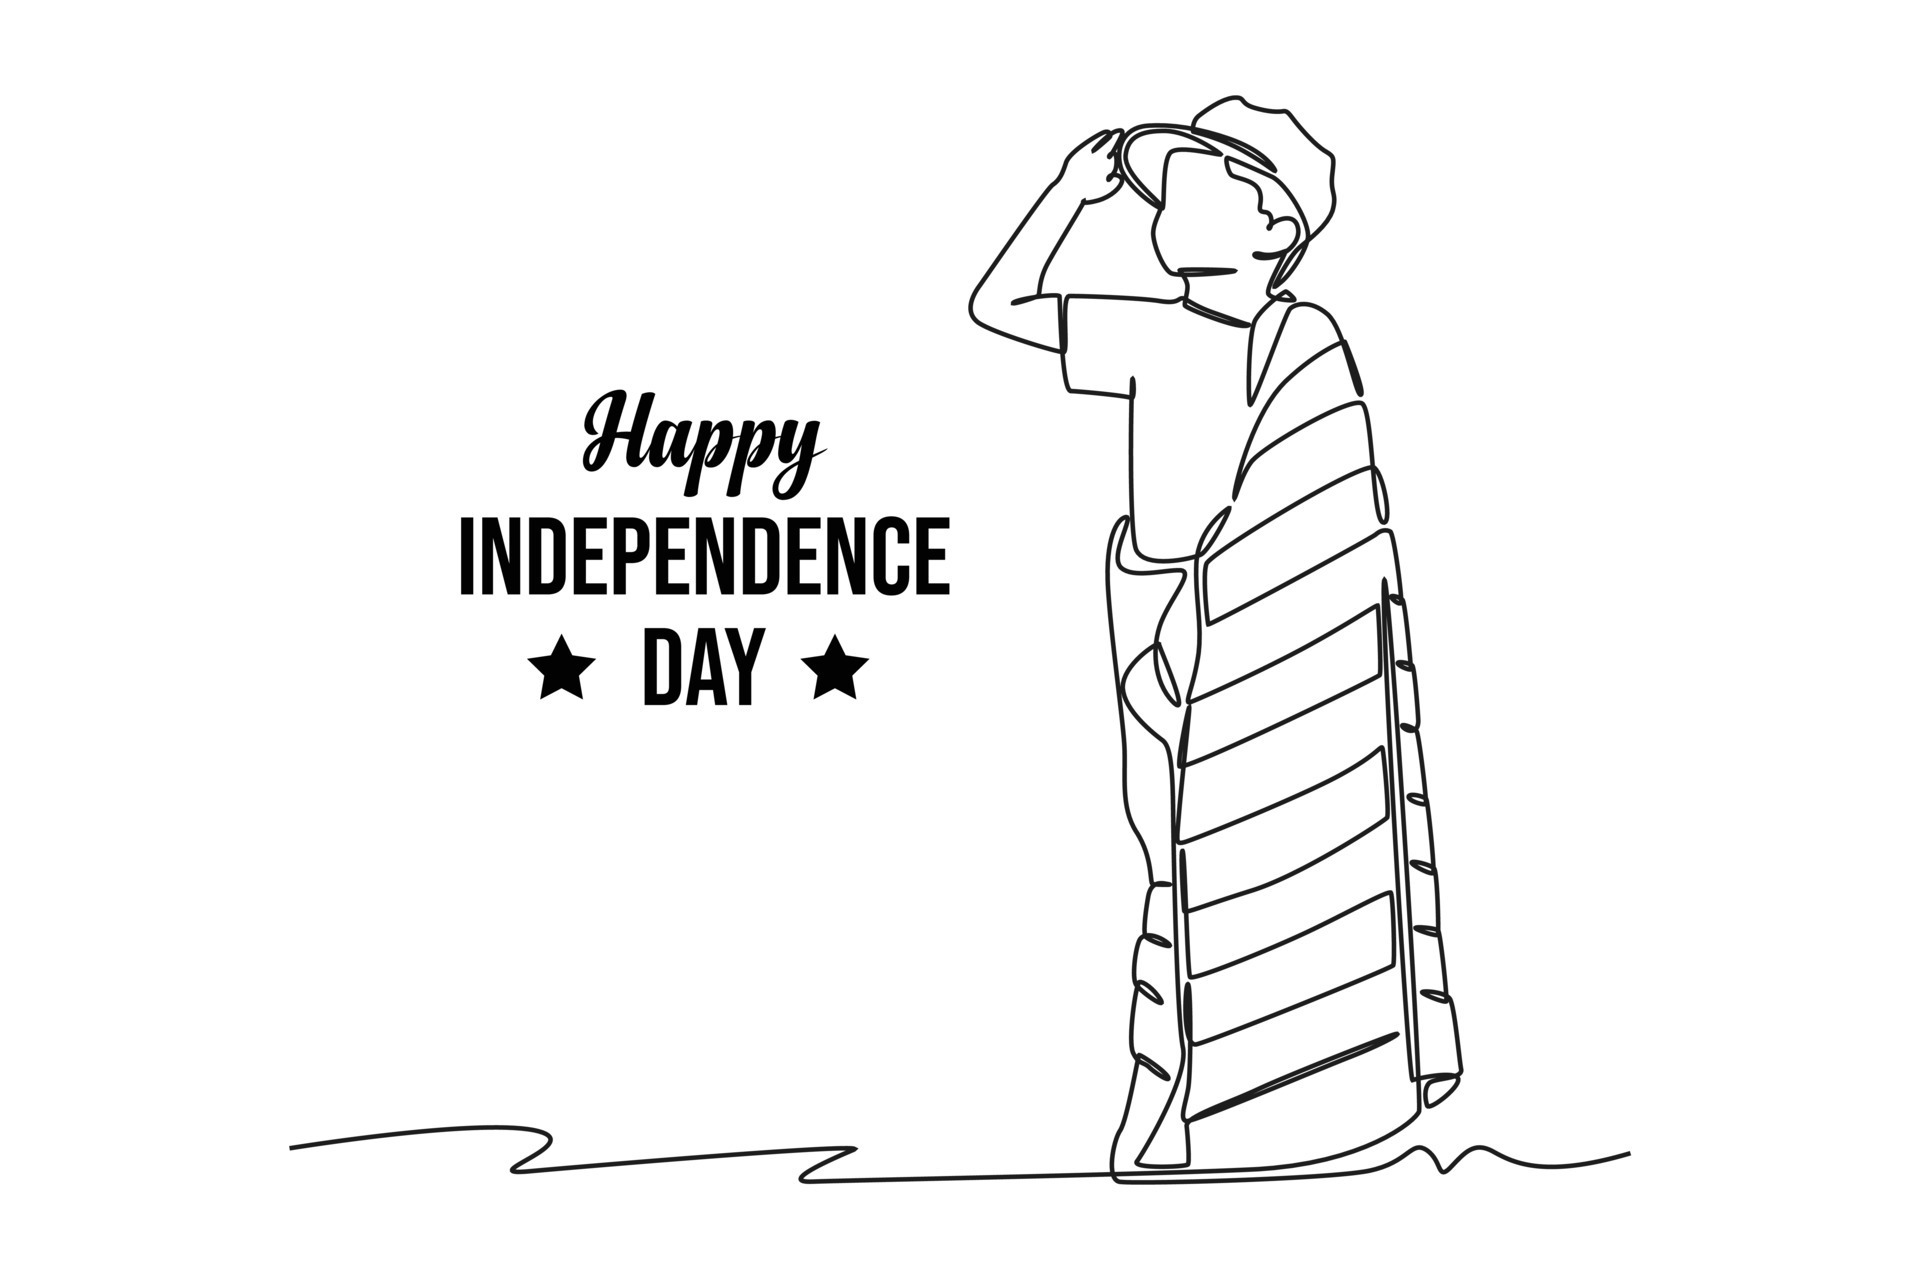 happy independence day Template | PosterMyWall-saigonsouth.com.vn